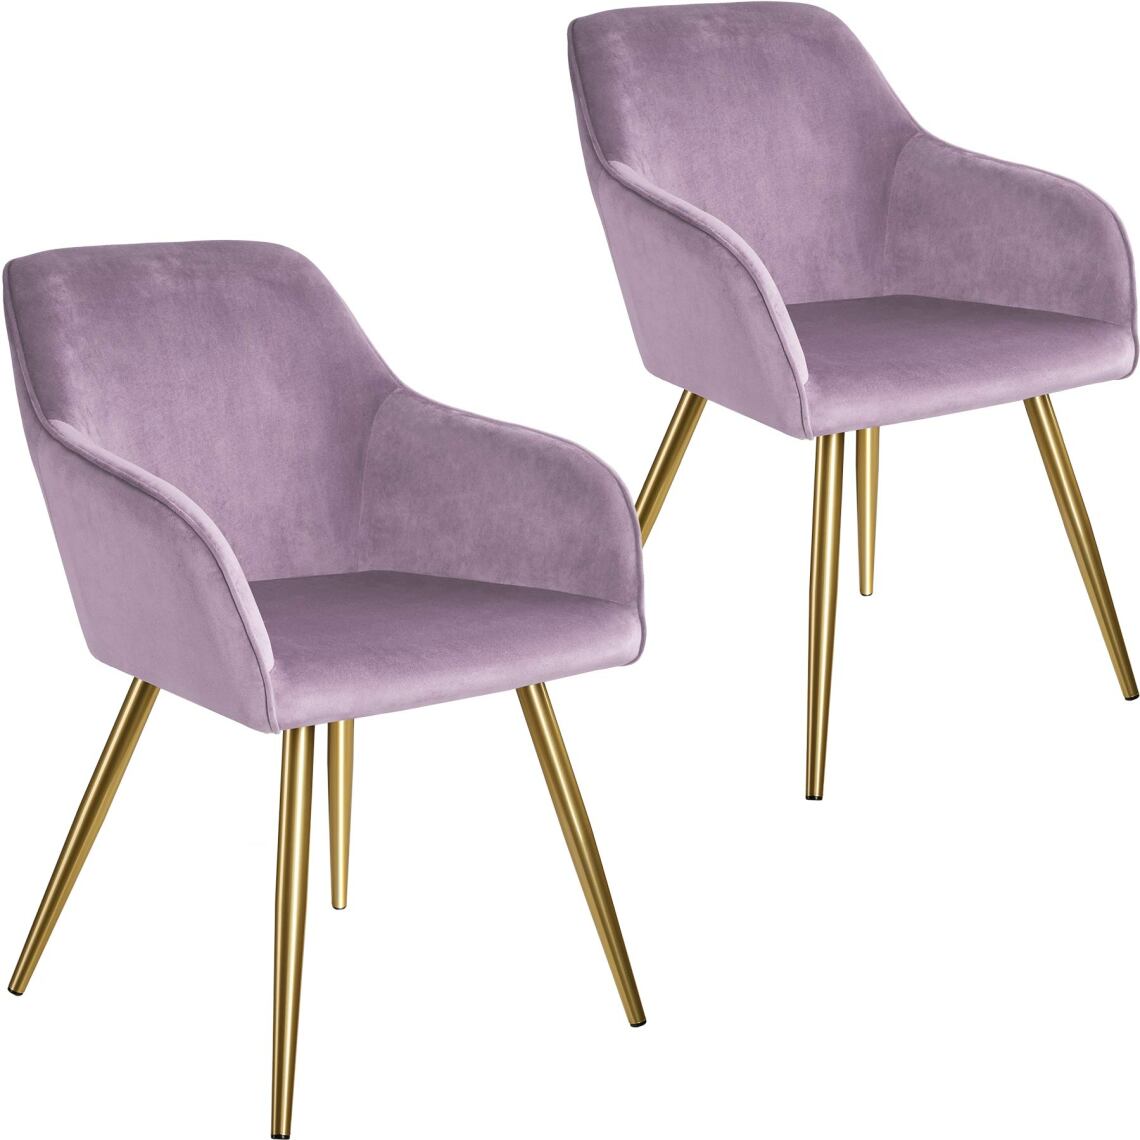 Tectake - 2 Chaises MARILYN Effet Velours Style Scandinave - violet clair/or - Chaises